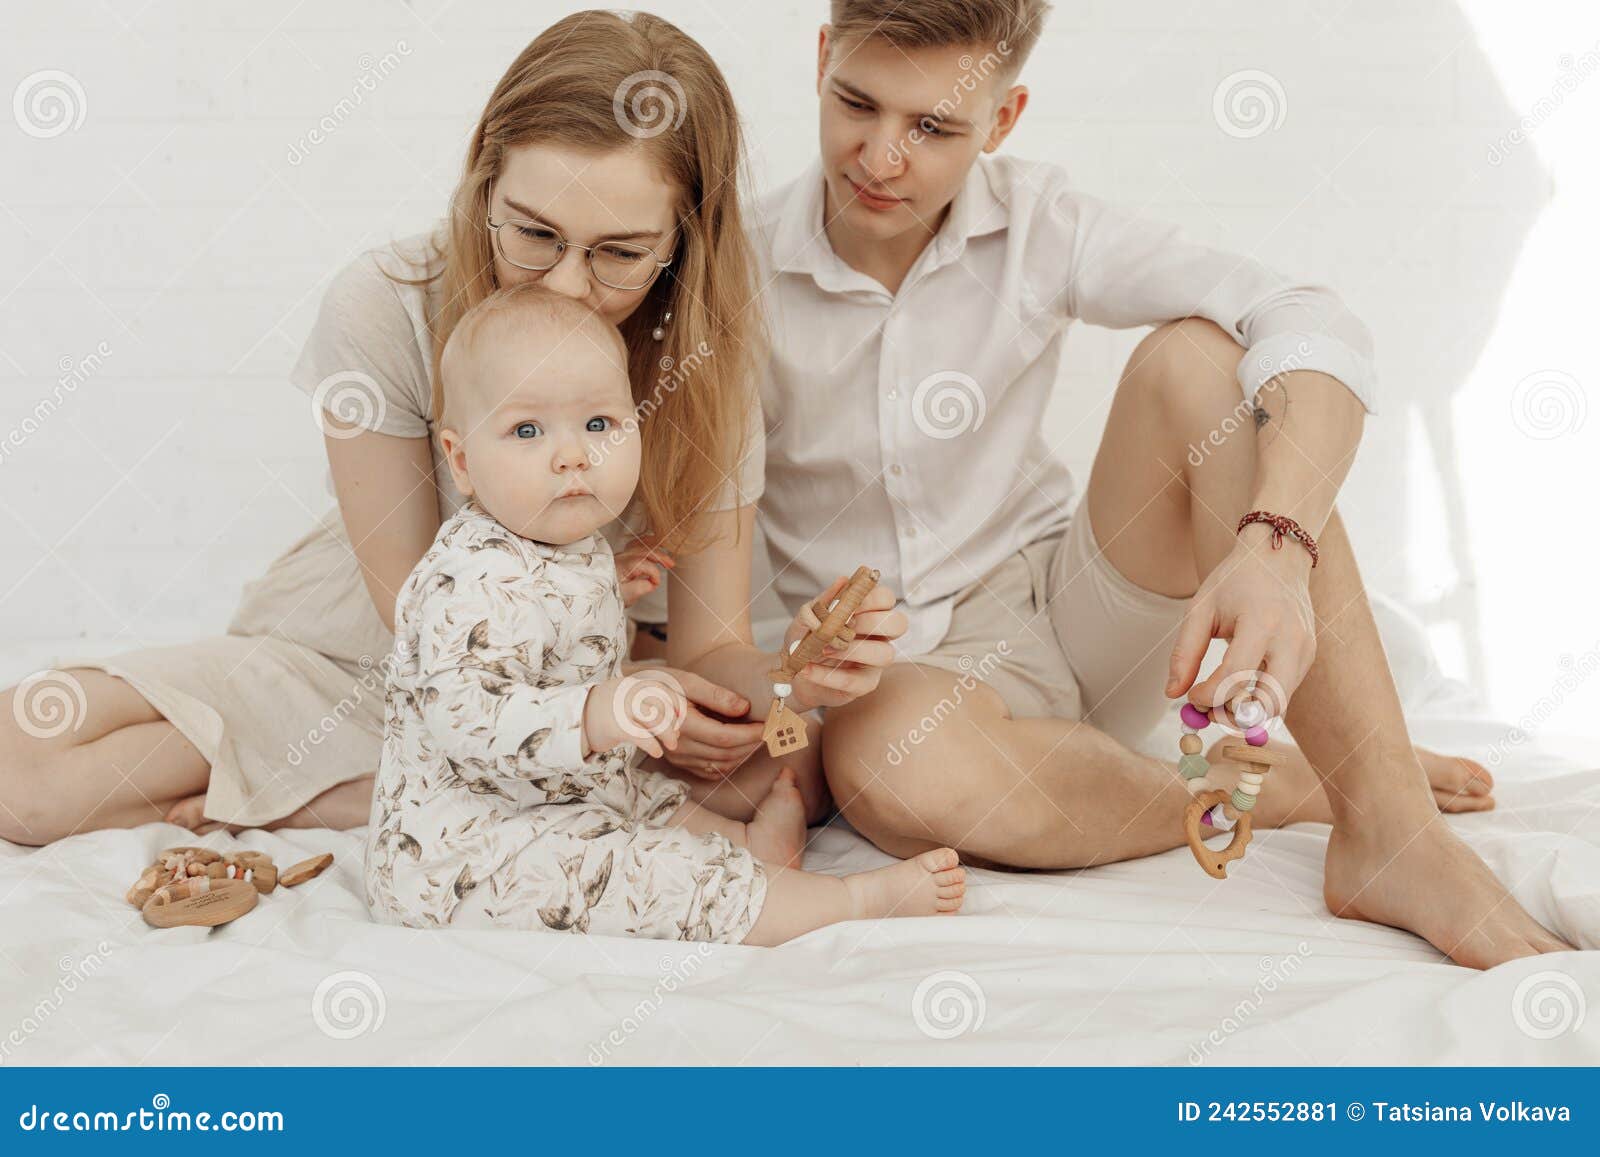 portrait of young family with cherubic infant baby, with blue eyes holding wooden natural teether sitting on white bed.